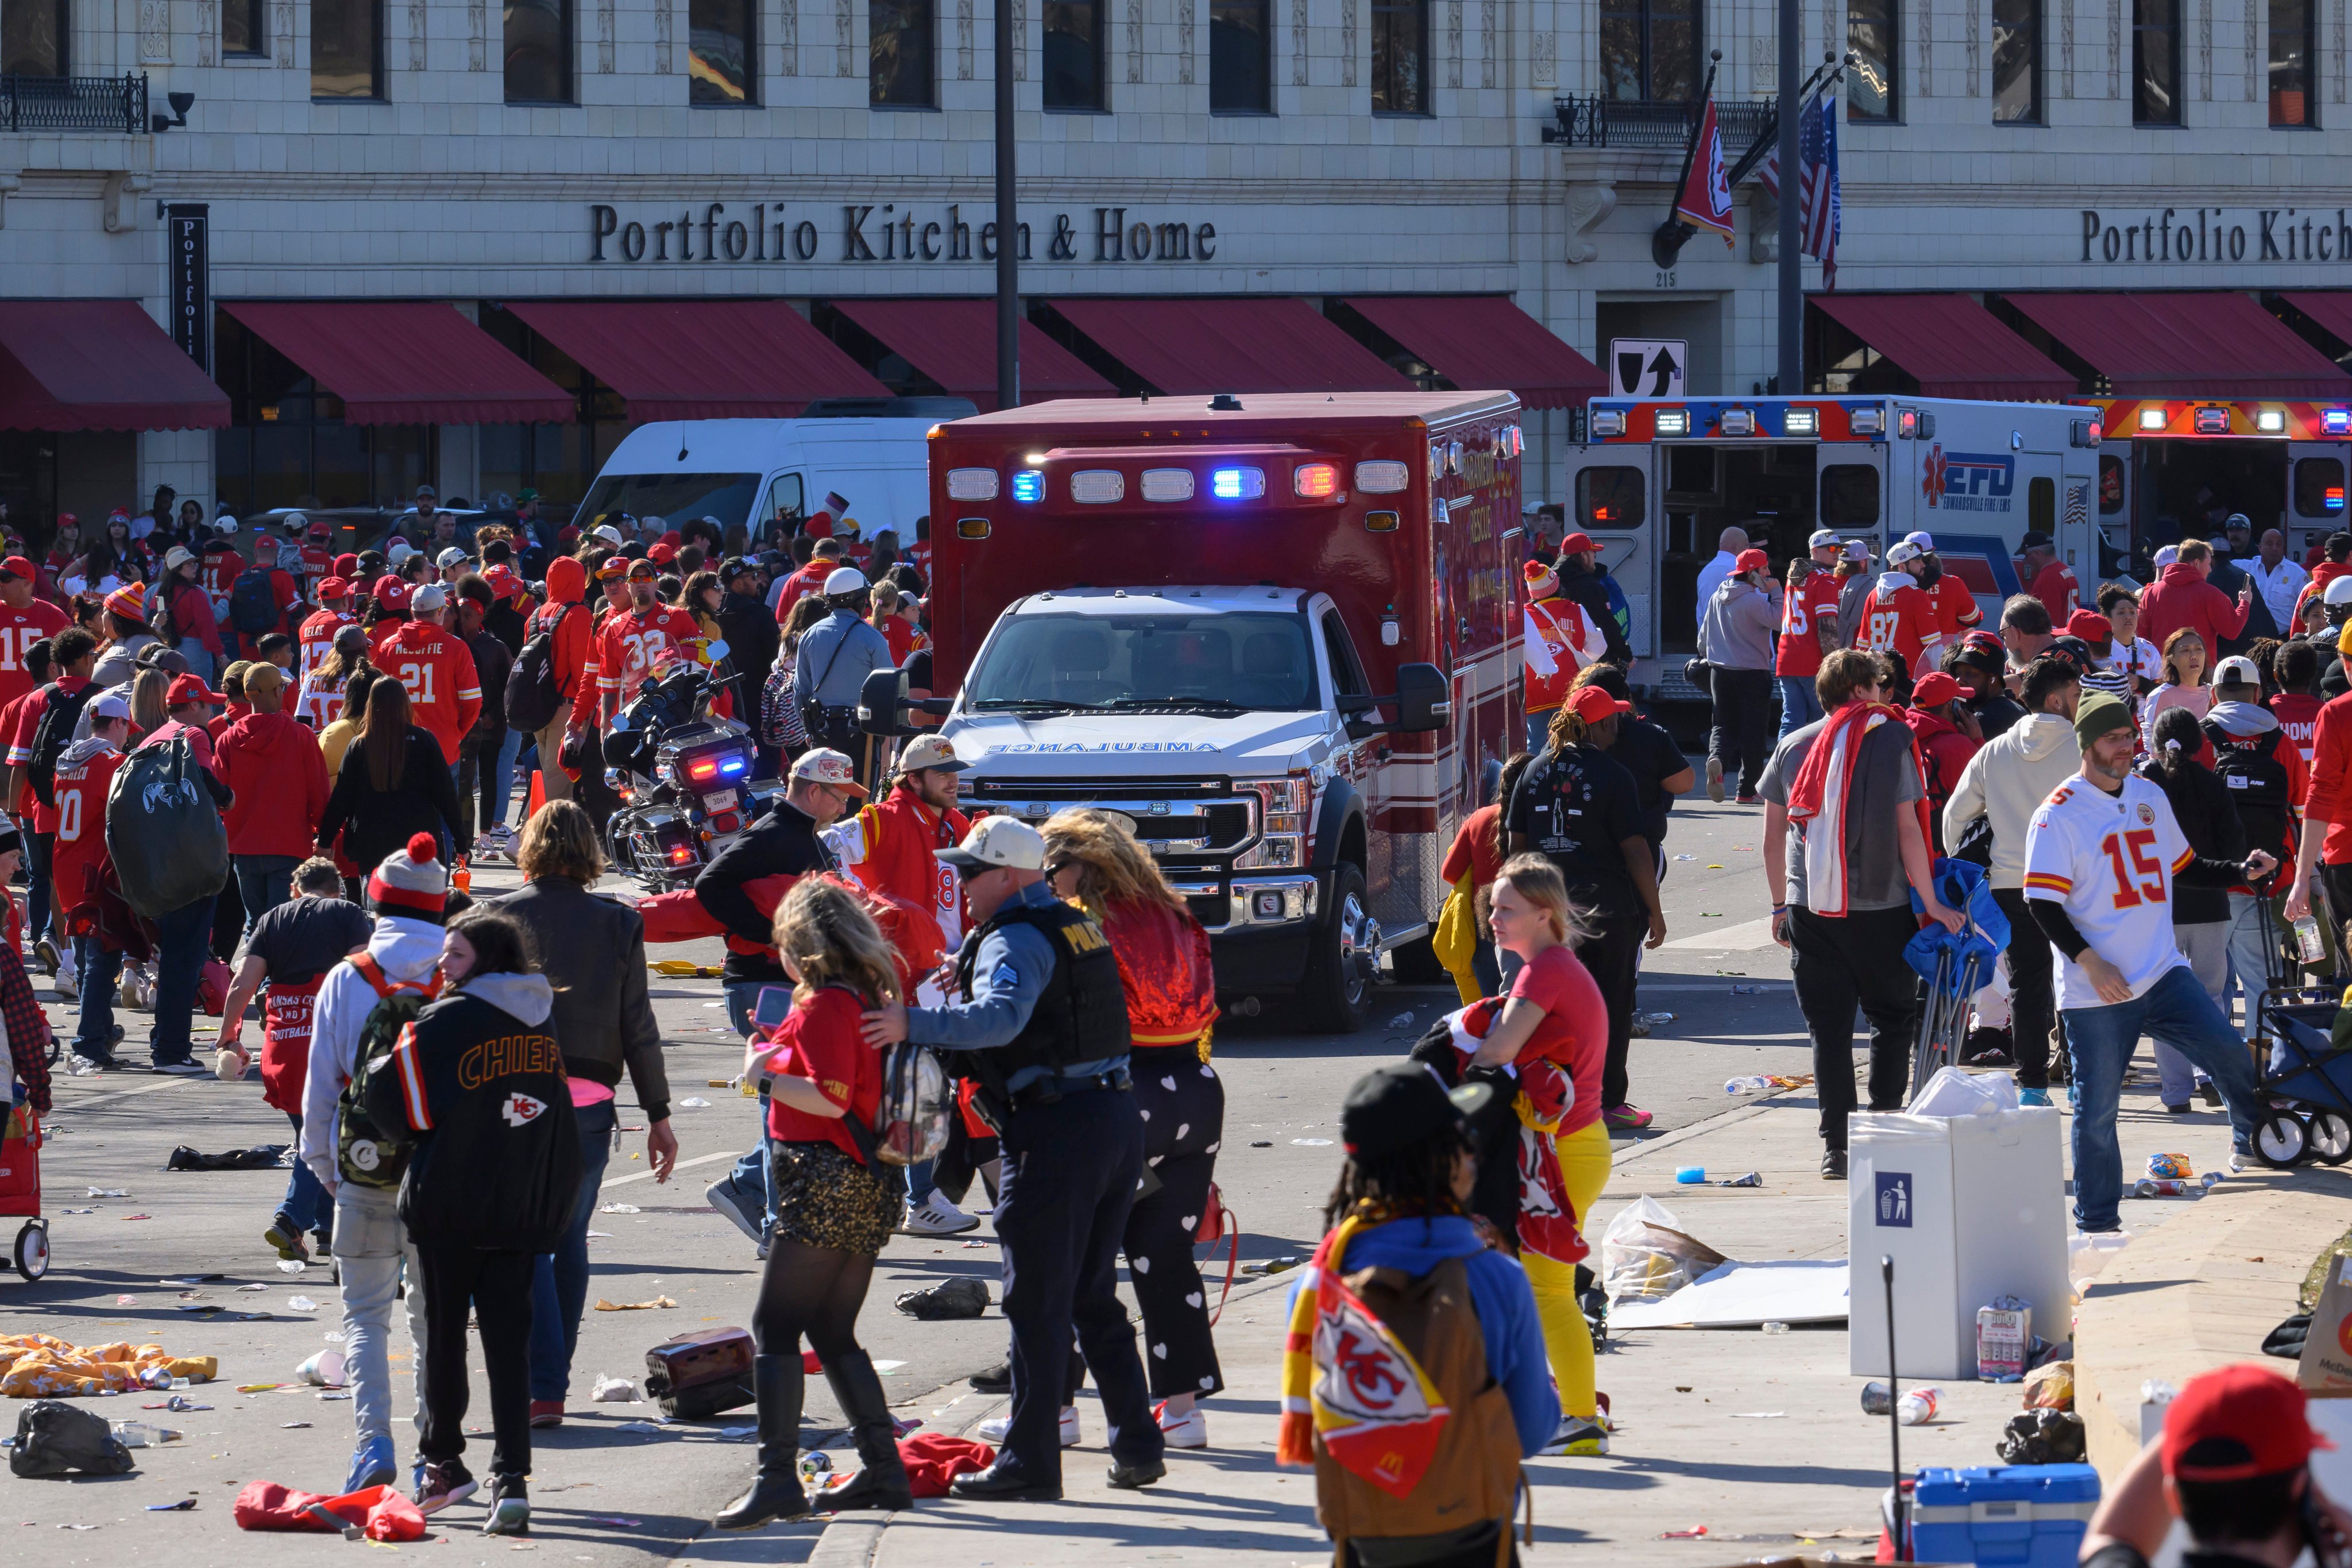 Police clear the area following a shooting at the Kansas City Chiefs Super Bowl celebration in Kansas City, Missouri, on February 14. Photo: AP